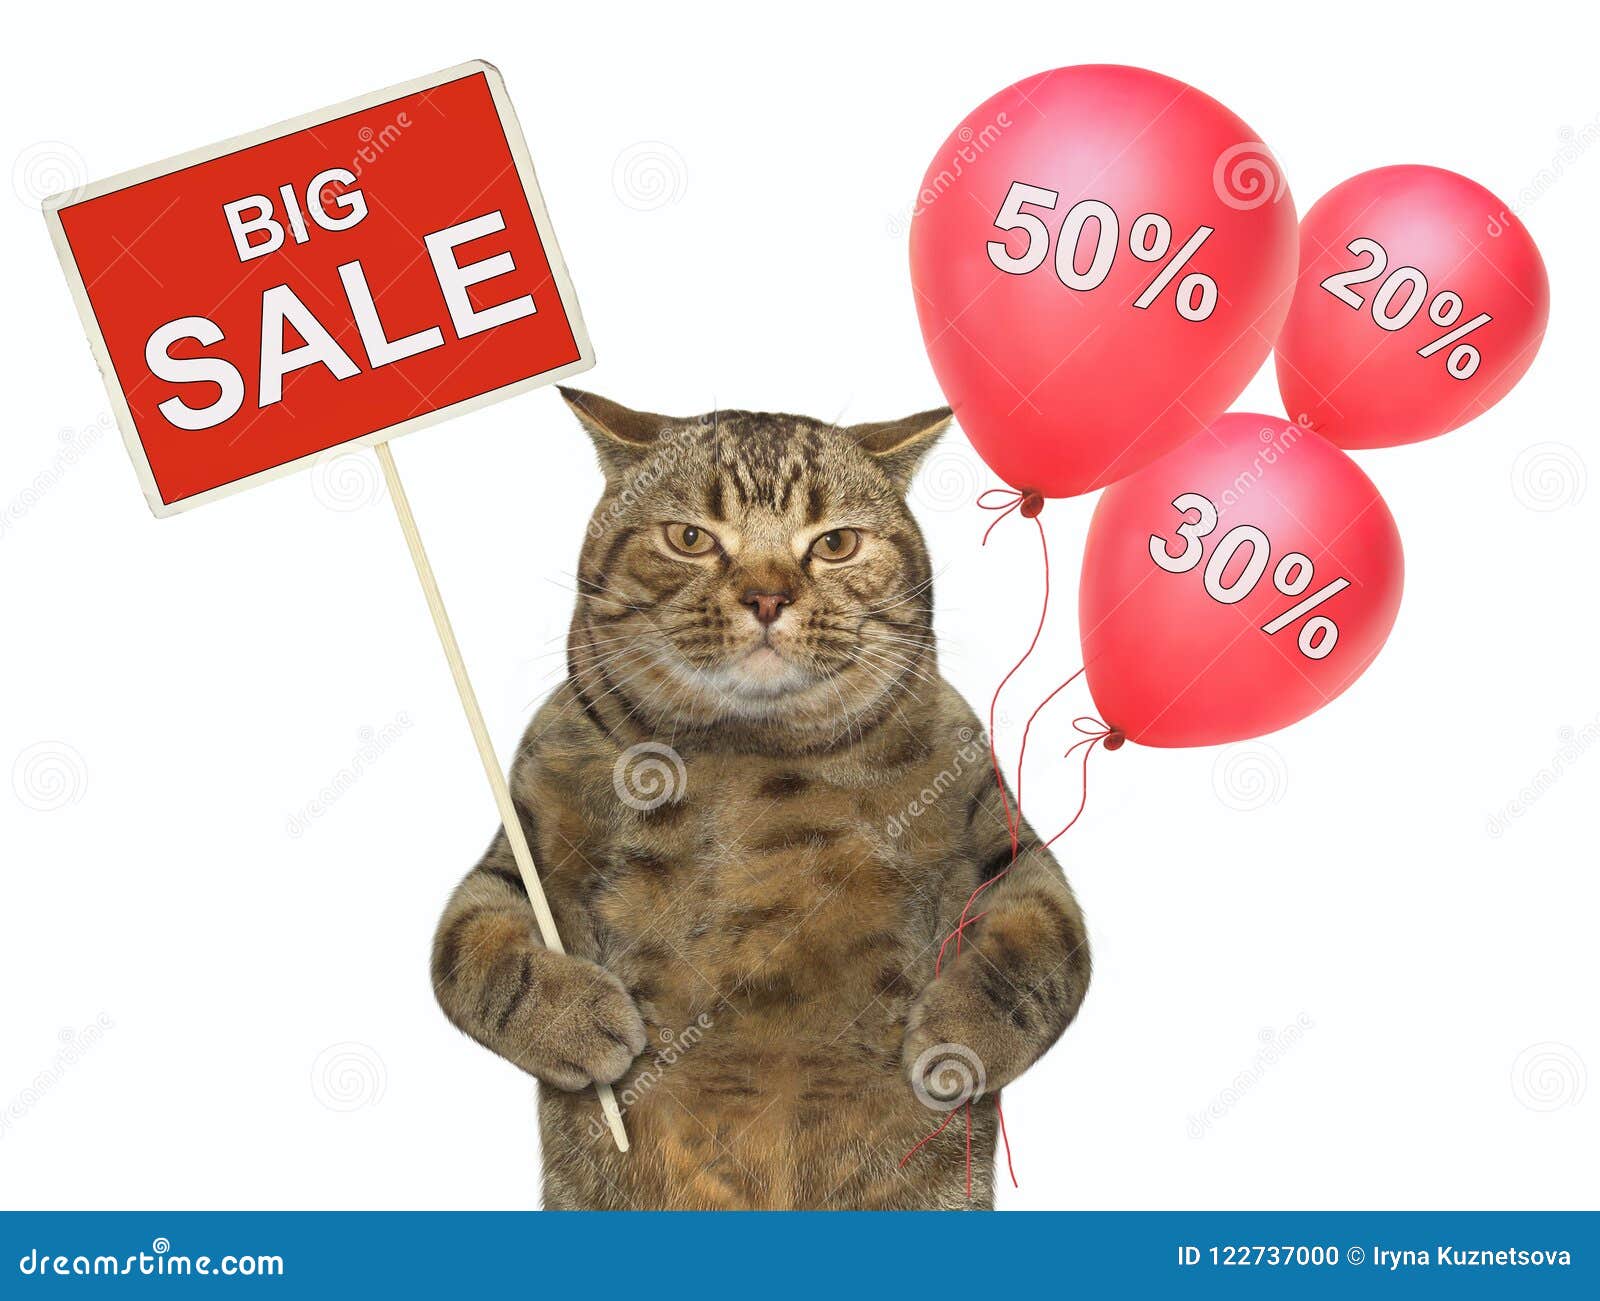 3 502 Cat Sale Photos Free Royalty Free Stock Photos From Dreamstime